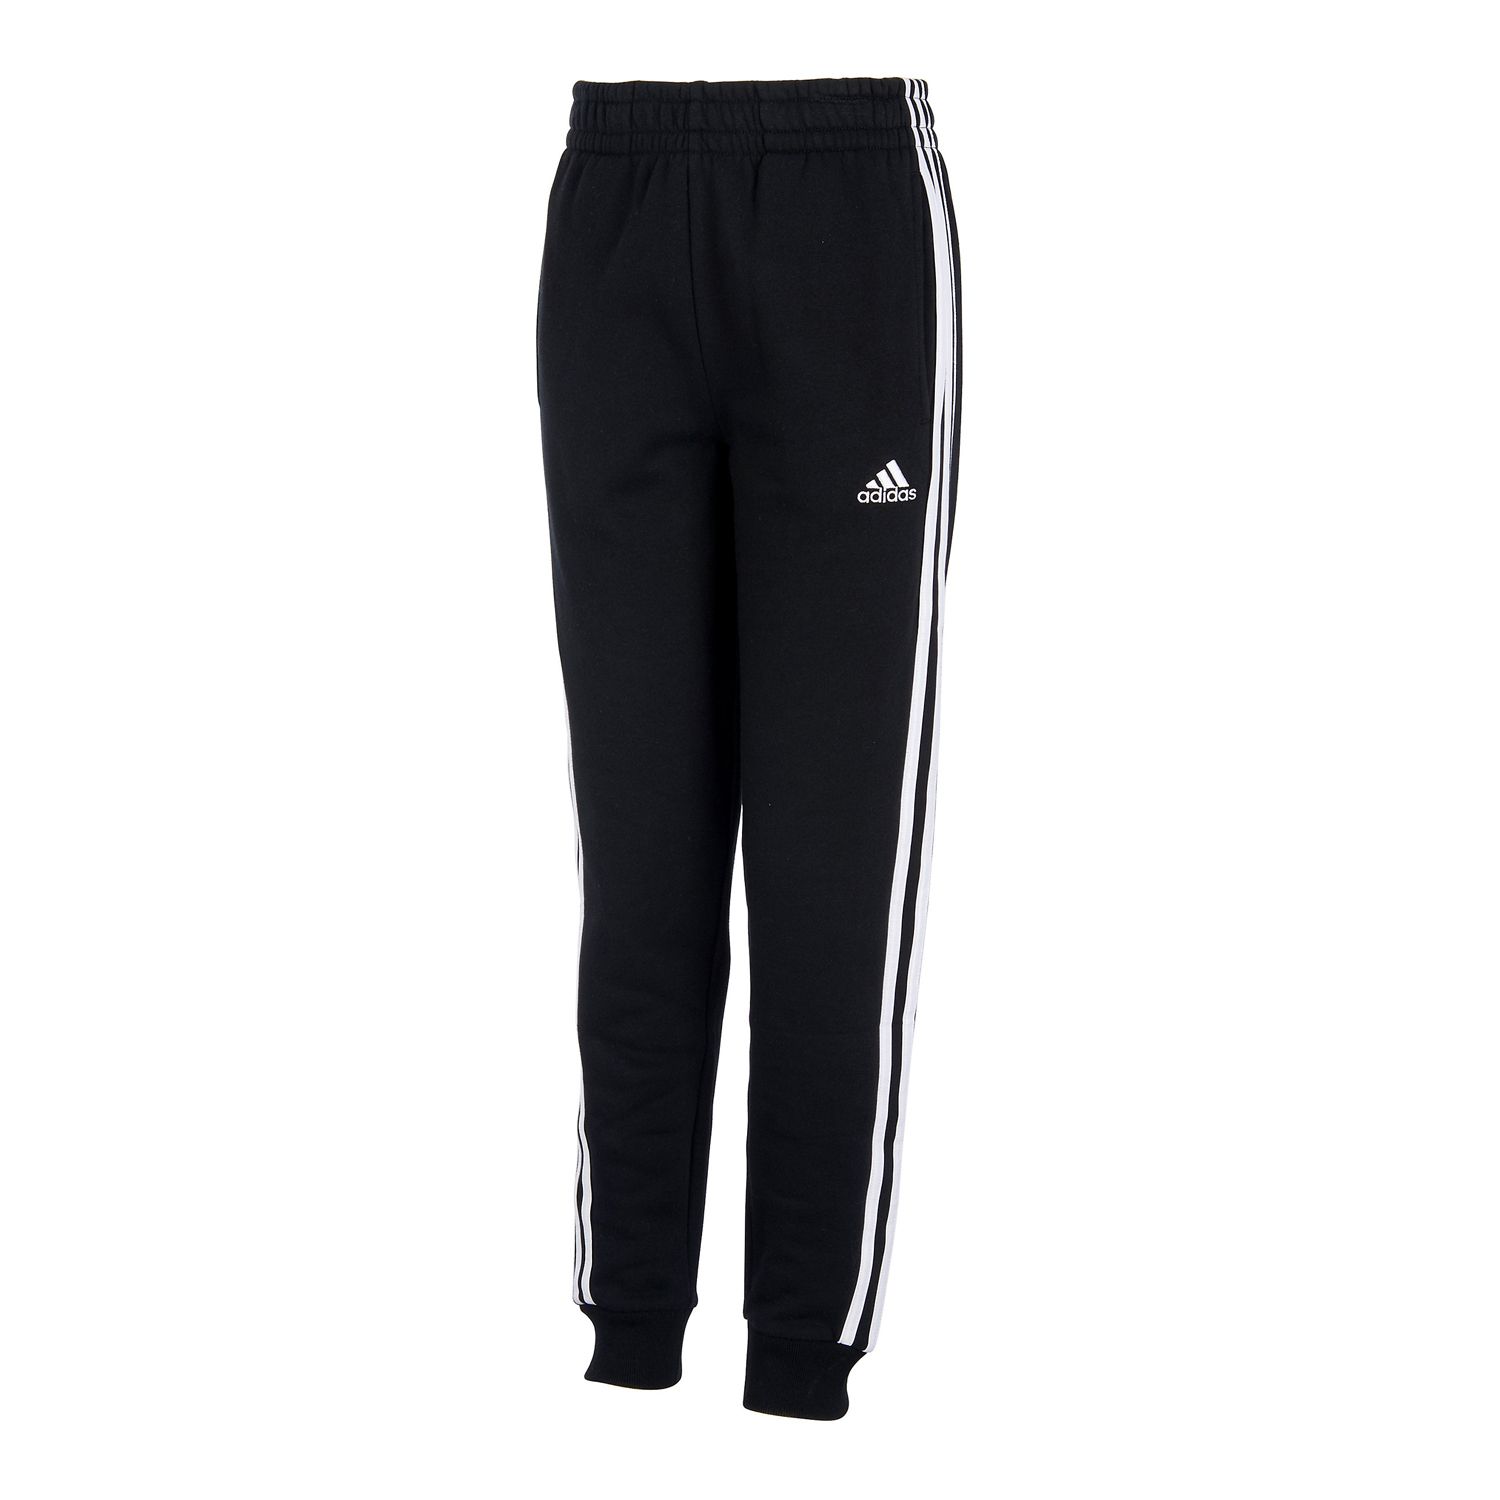 where can you get adidas pants